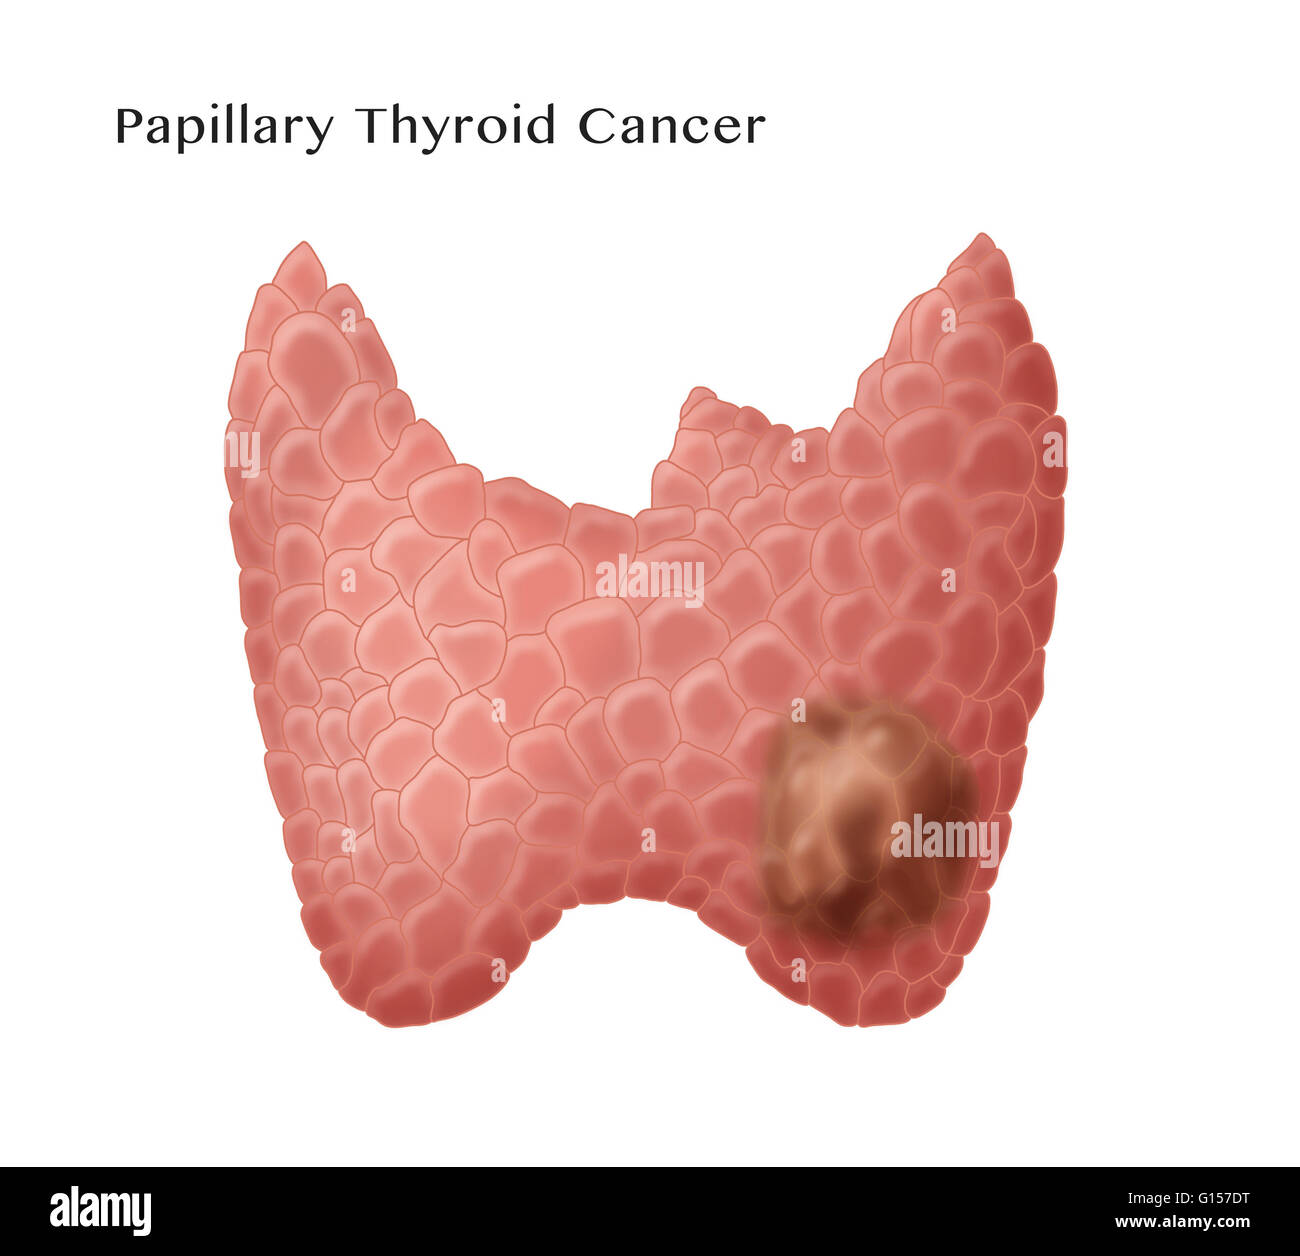 Labeled illustration showing papillary thyroid cancer, the most common form of thyroid cancer. Stock Photo